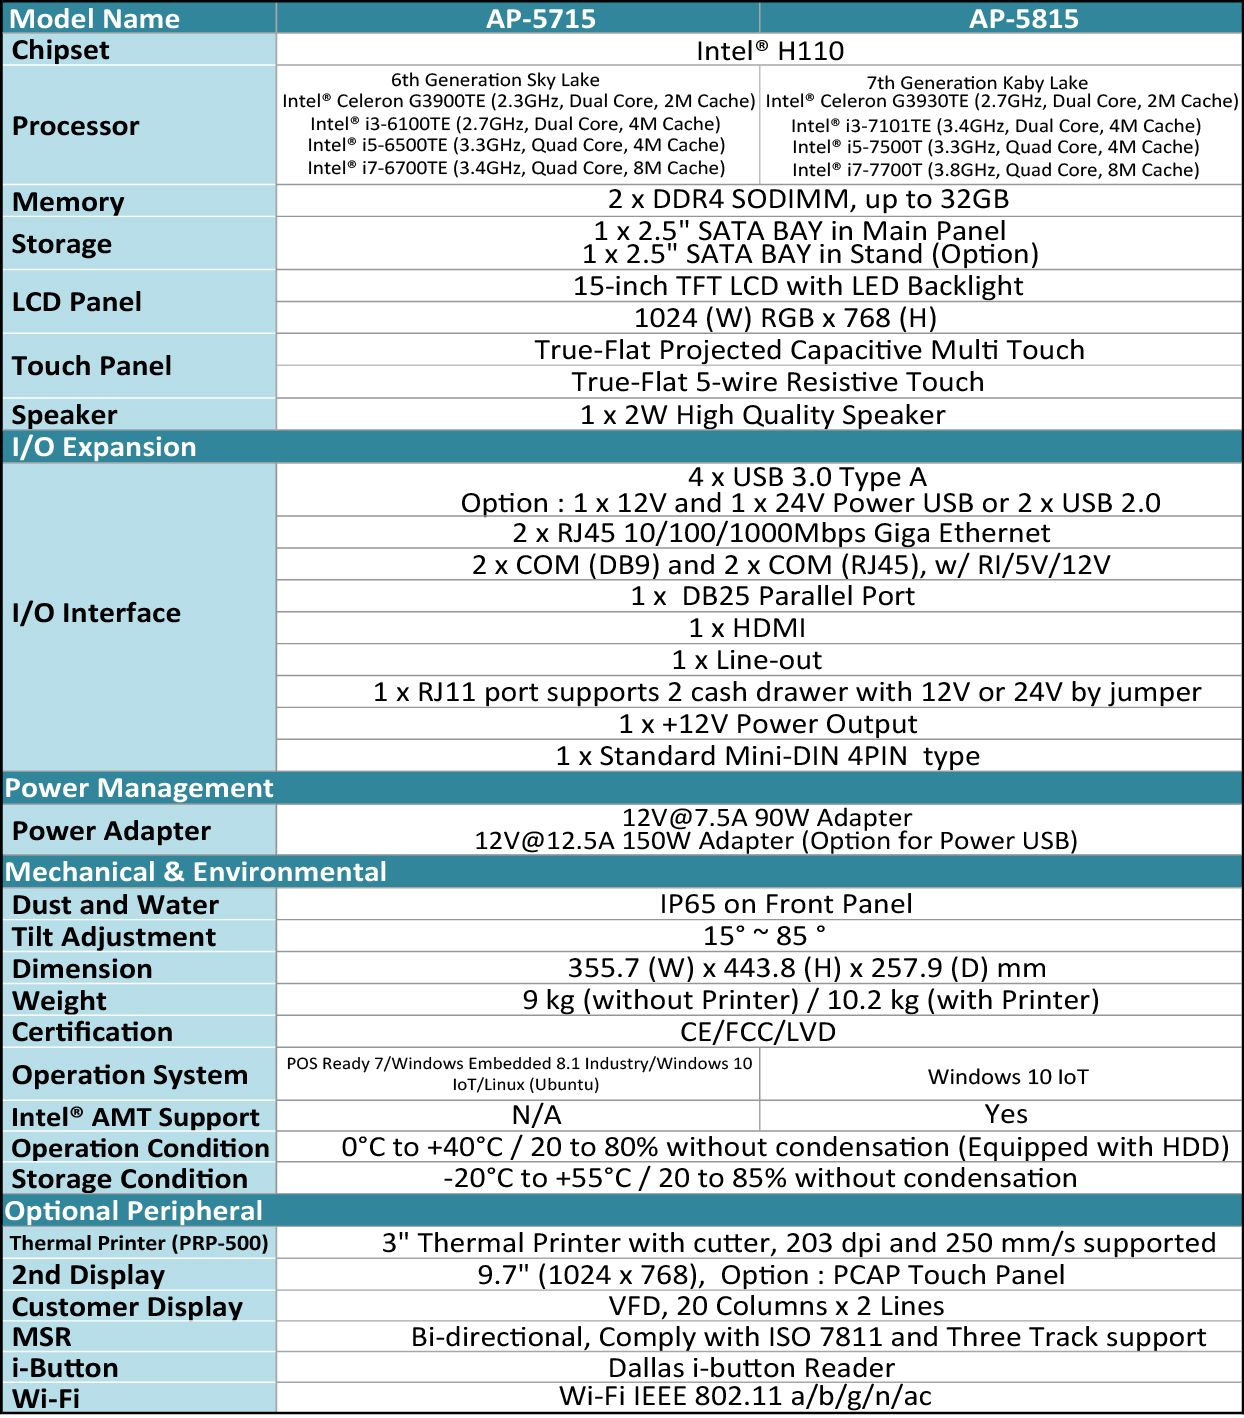 Specification of AP-5715